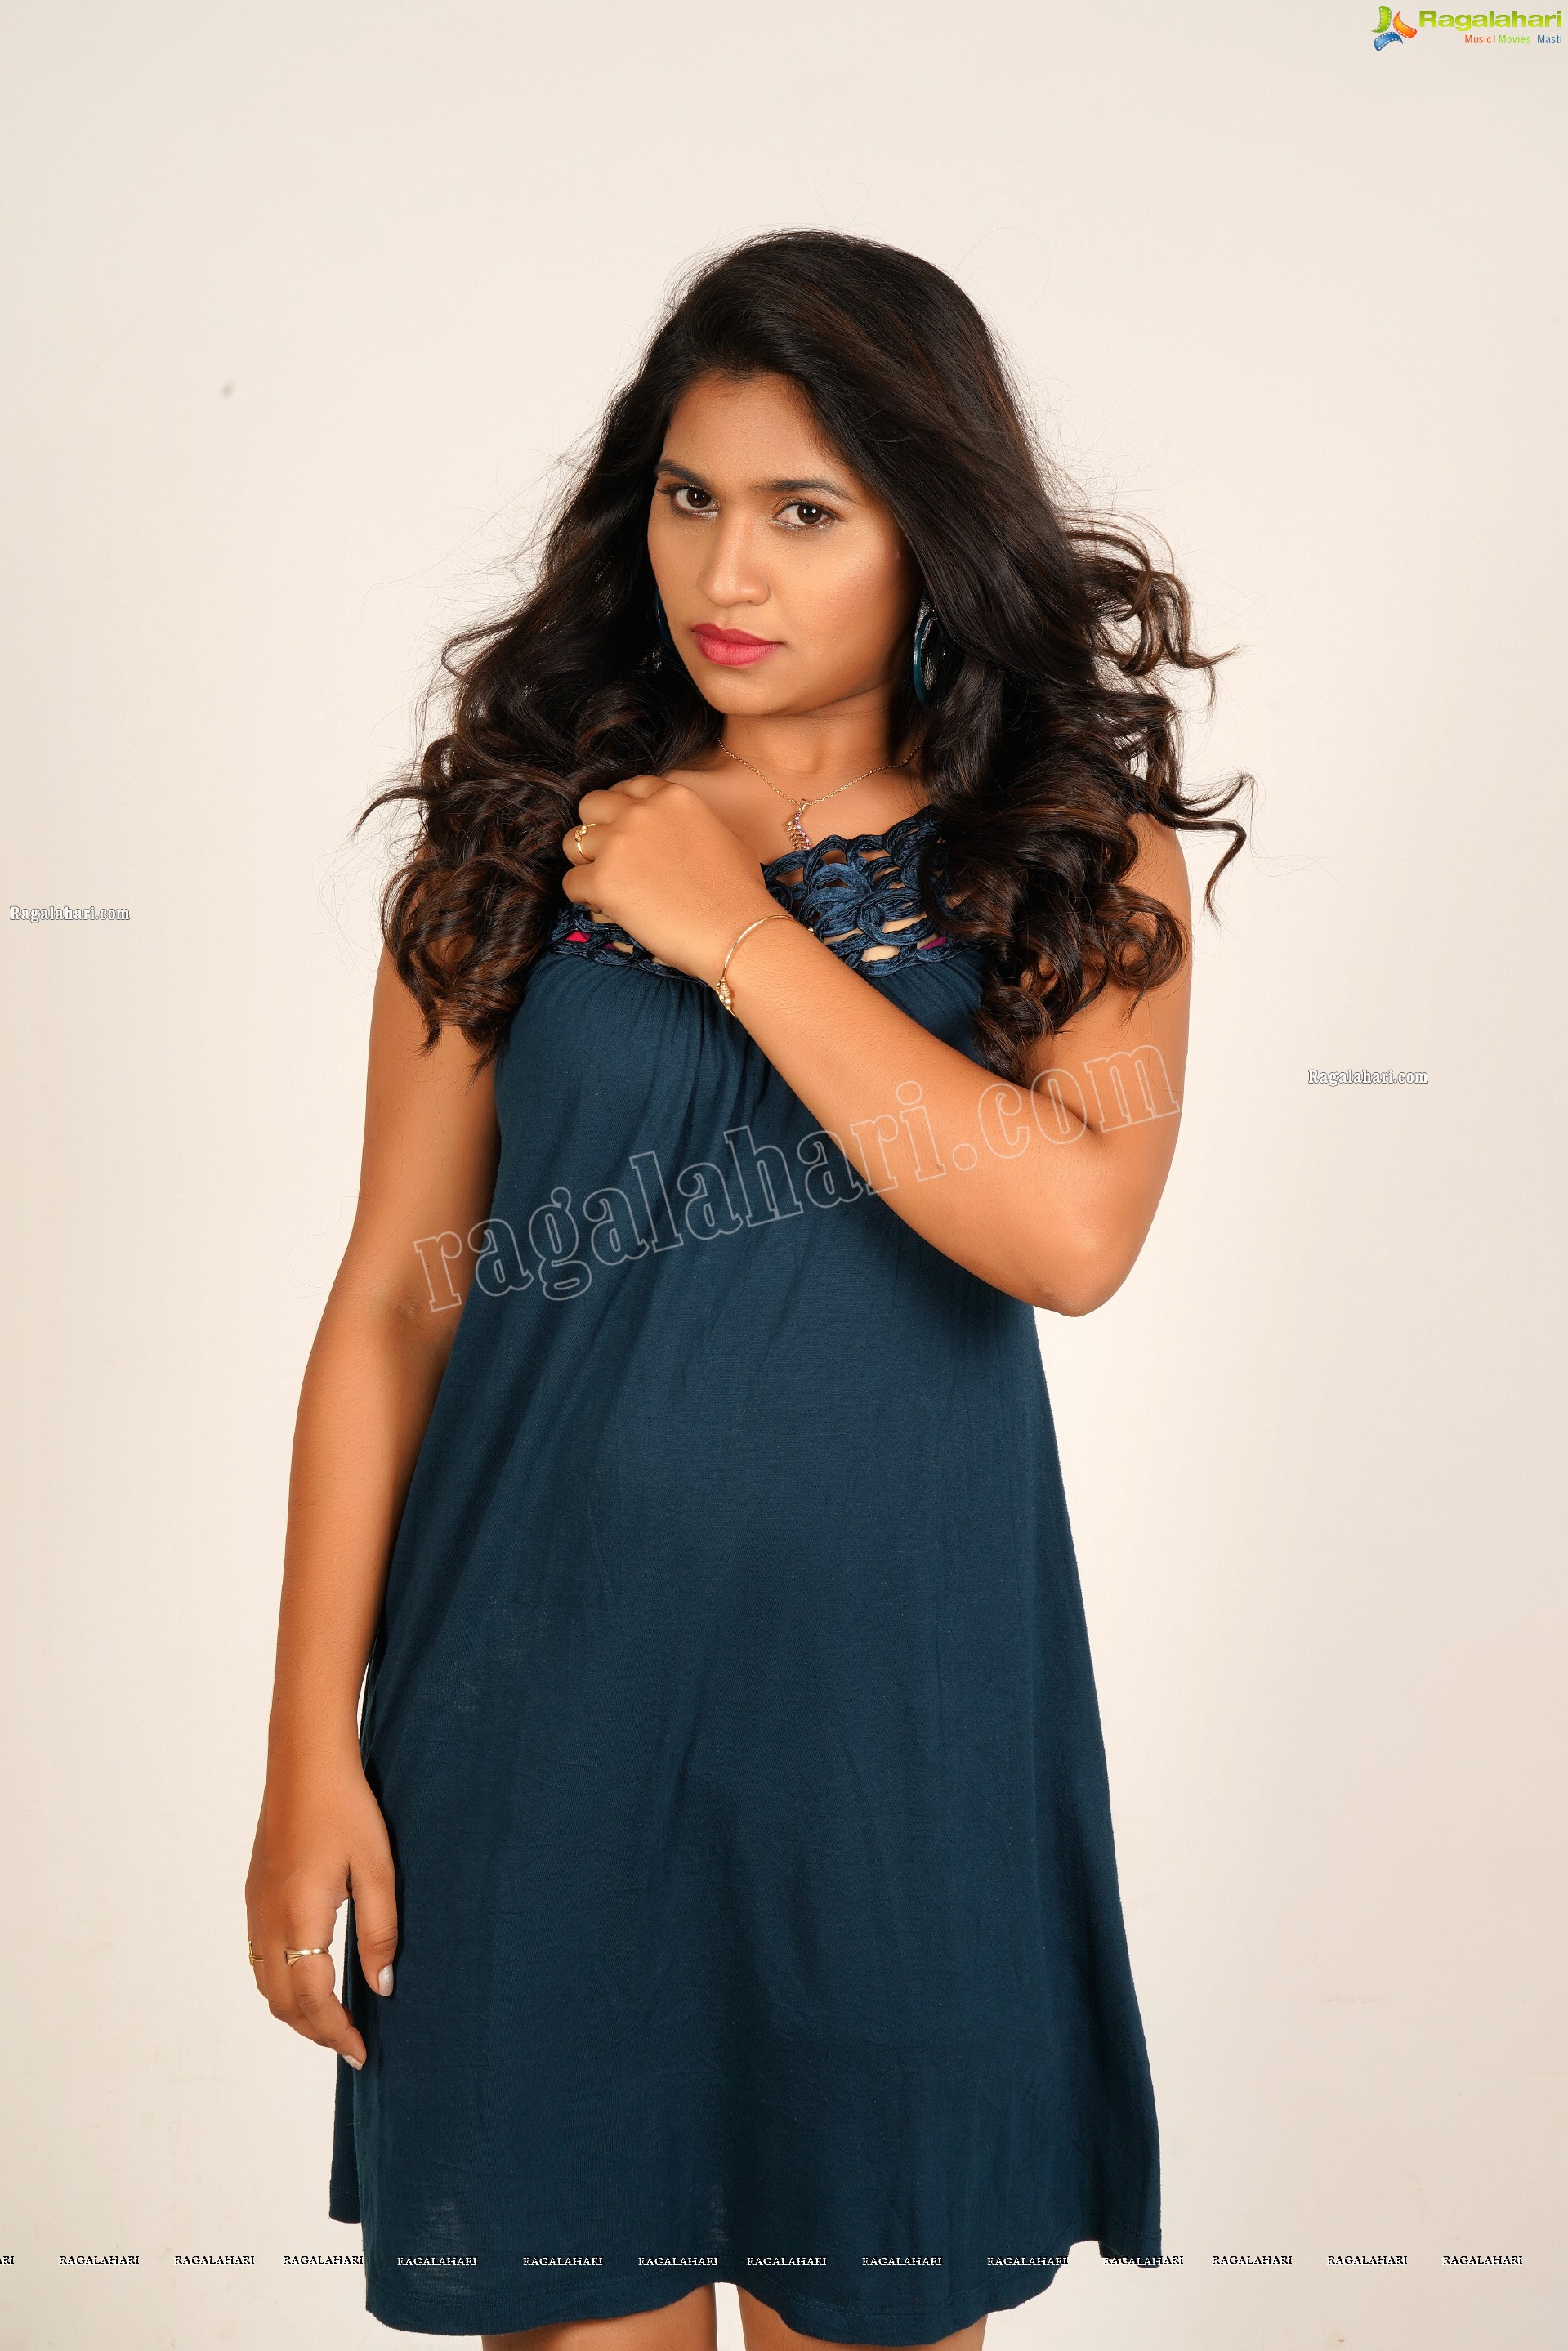 Honey Royal in Teal Blue Mini Dress, Exclusive Photoshoot